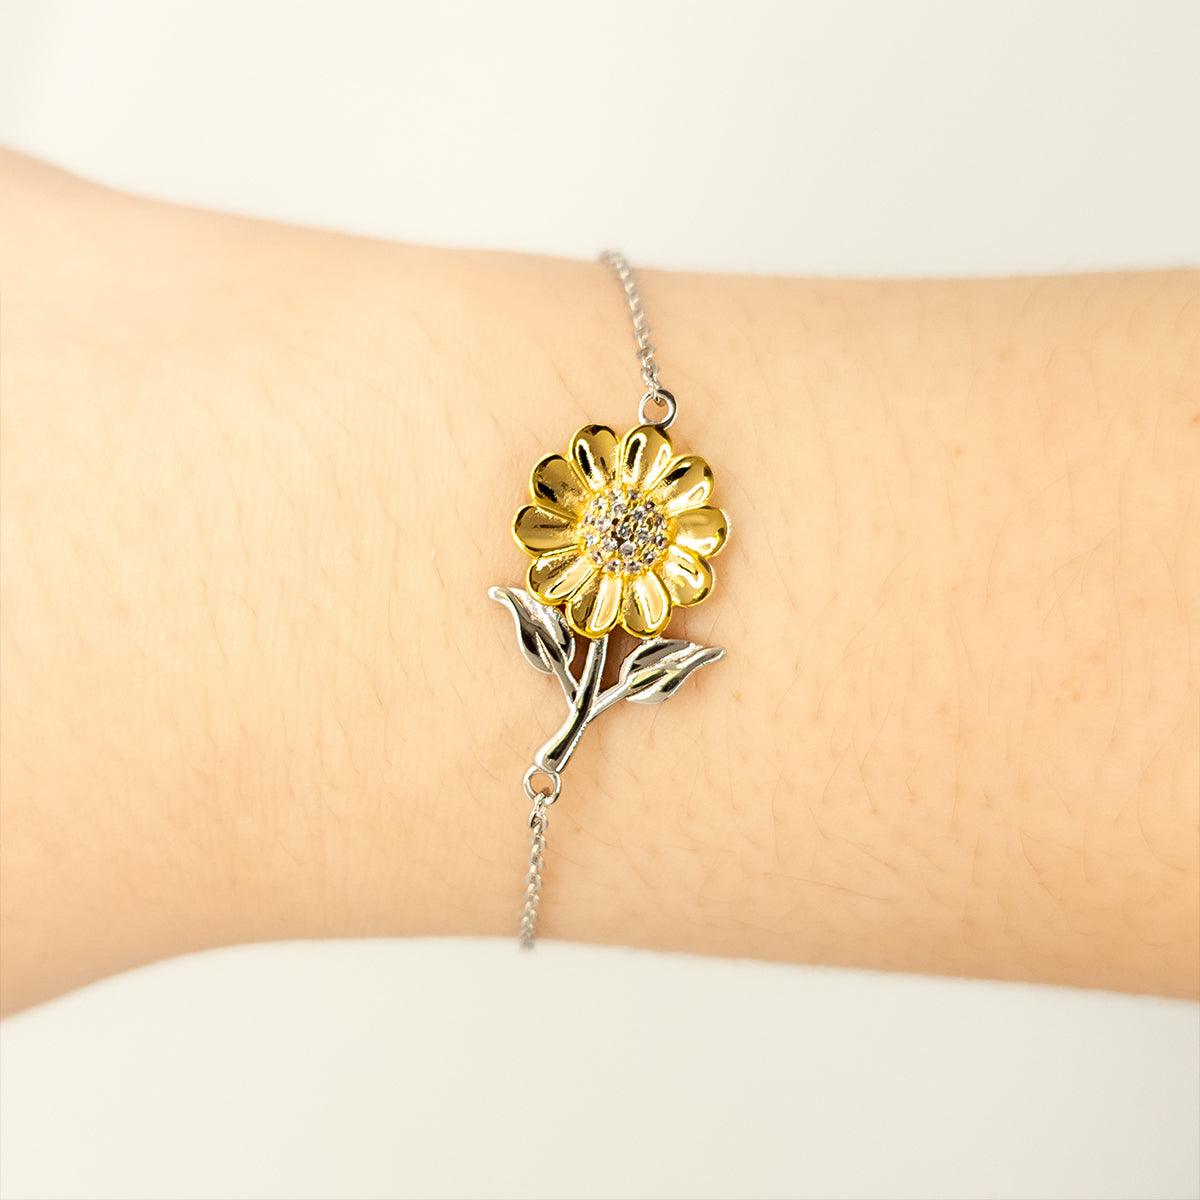 Sarcastic Inspector Sunflower Bracelet Gifts, Christmas Holiday Gifts for Inspector Birthday Message Card, Inspector: Because greatness is woven into the fabric of every day, Coworkers, Friends - Mallard Moon Gift Shop